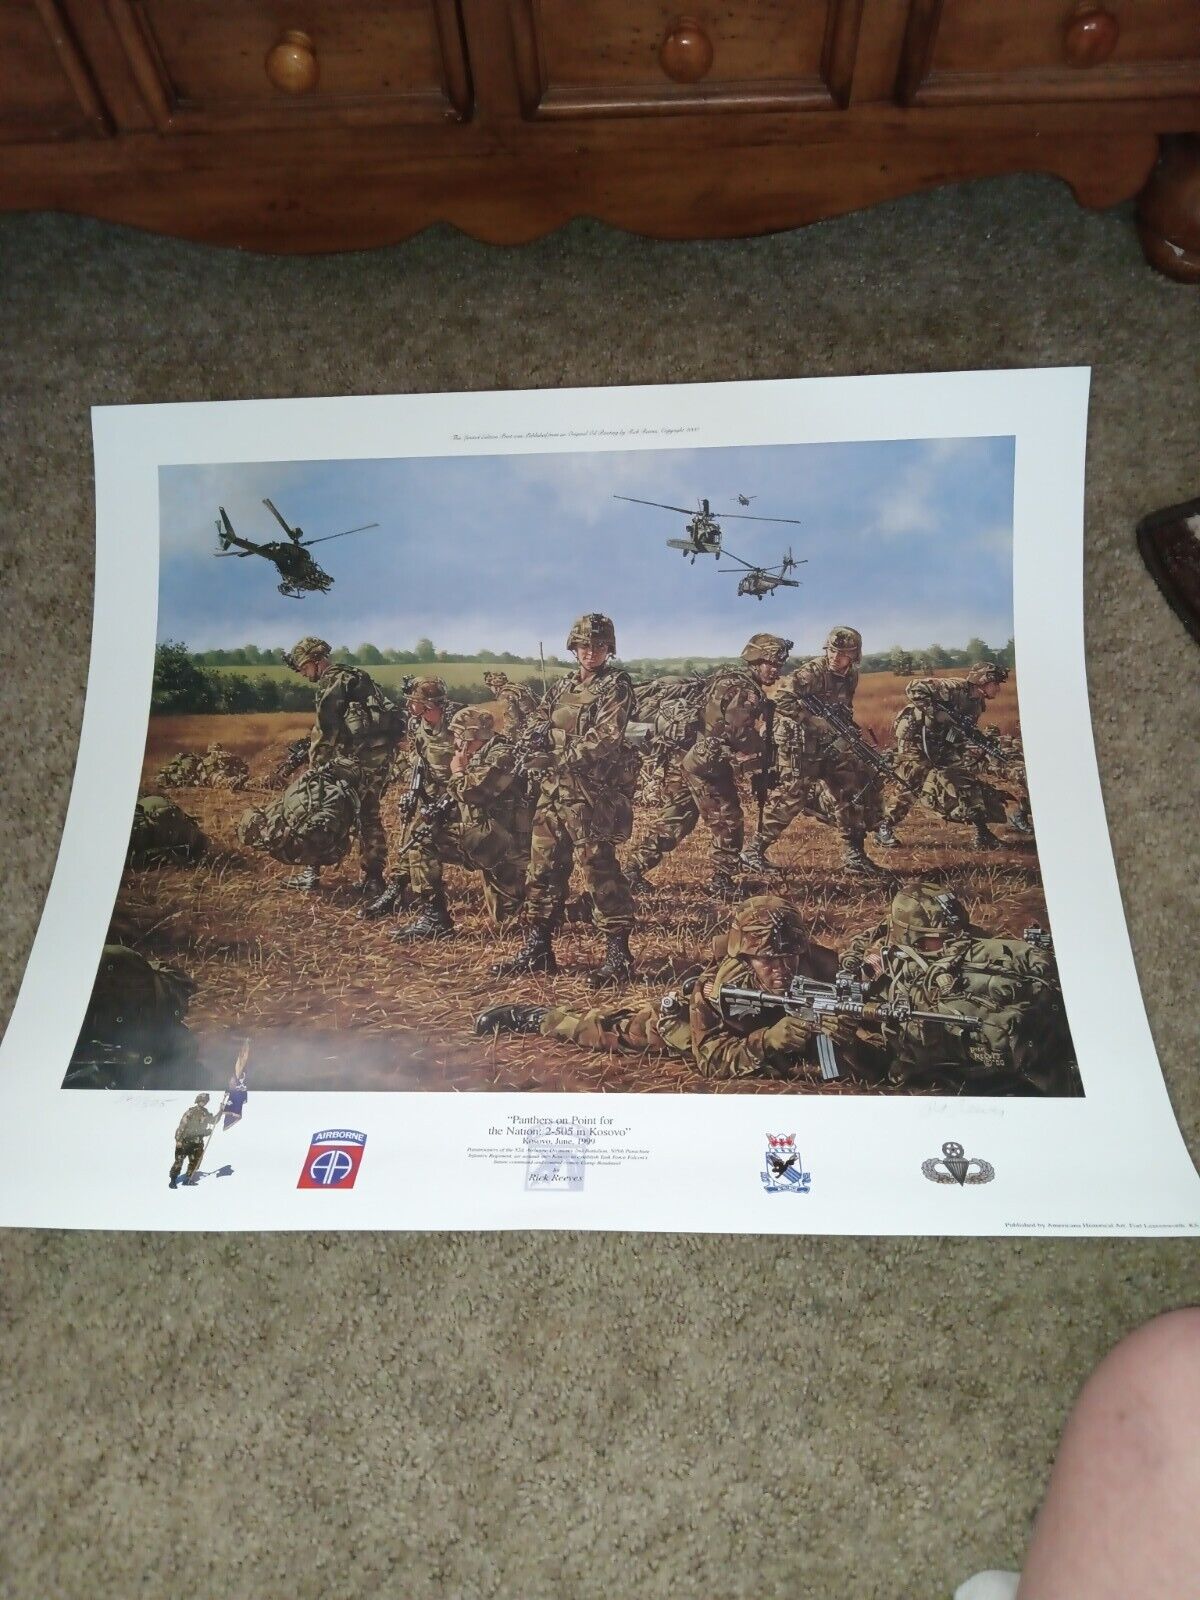 PANTHERS ON POINT by Rick Reeves KOSOVO 82nd AIRBORNE Ltd Ed Signed print 